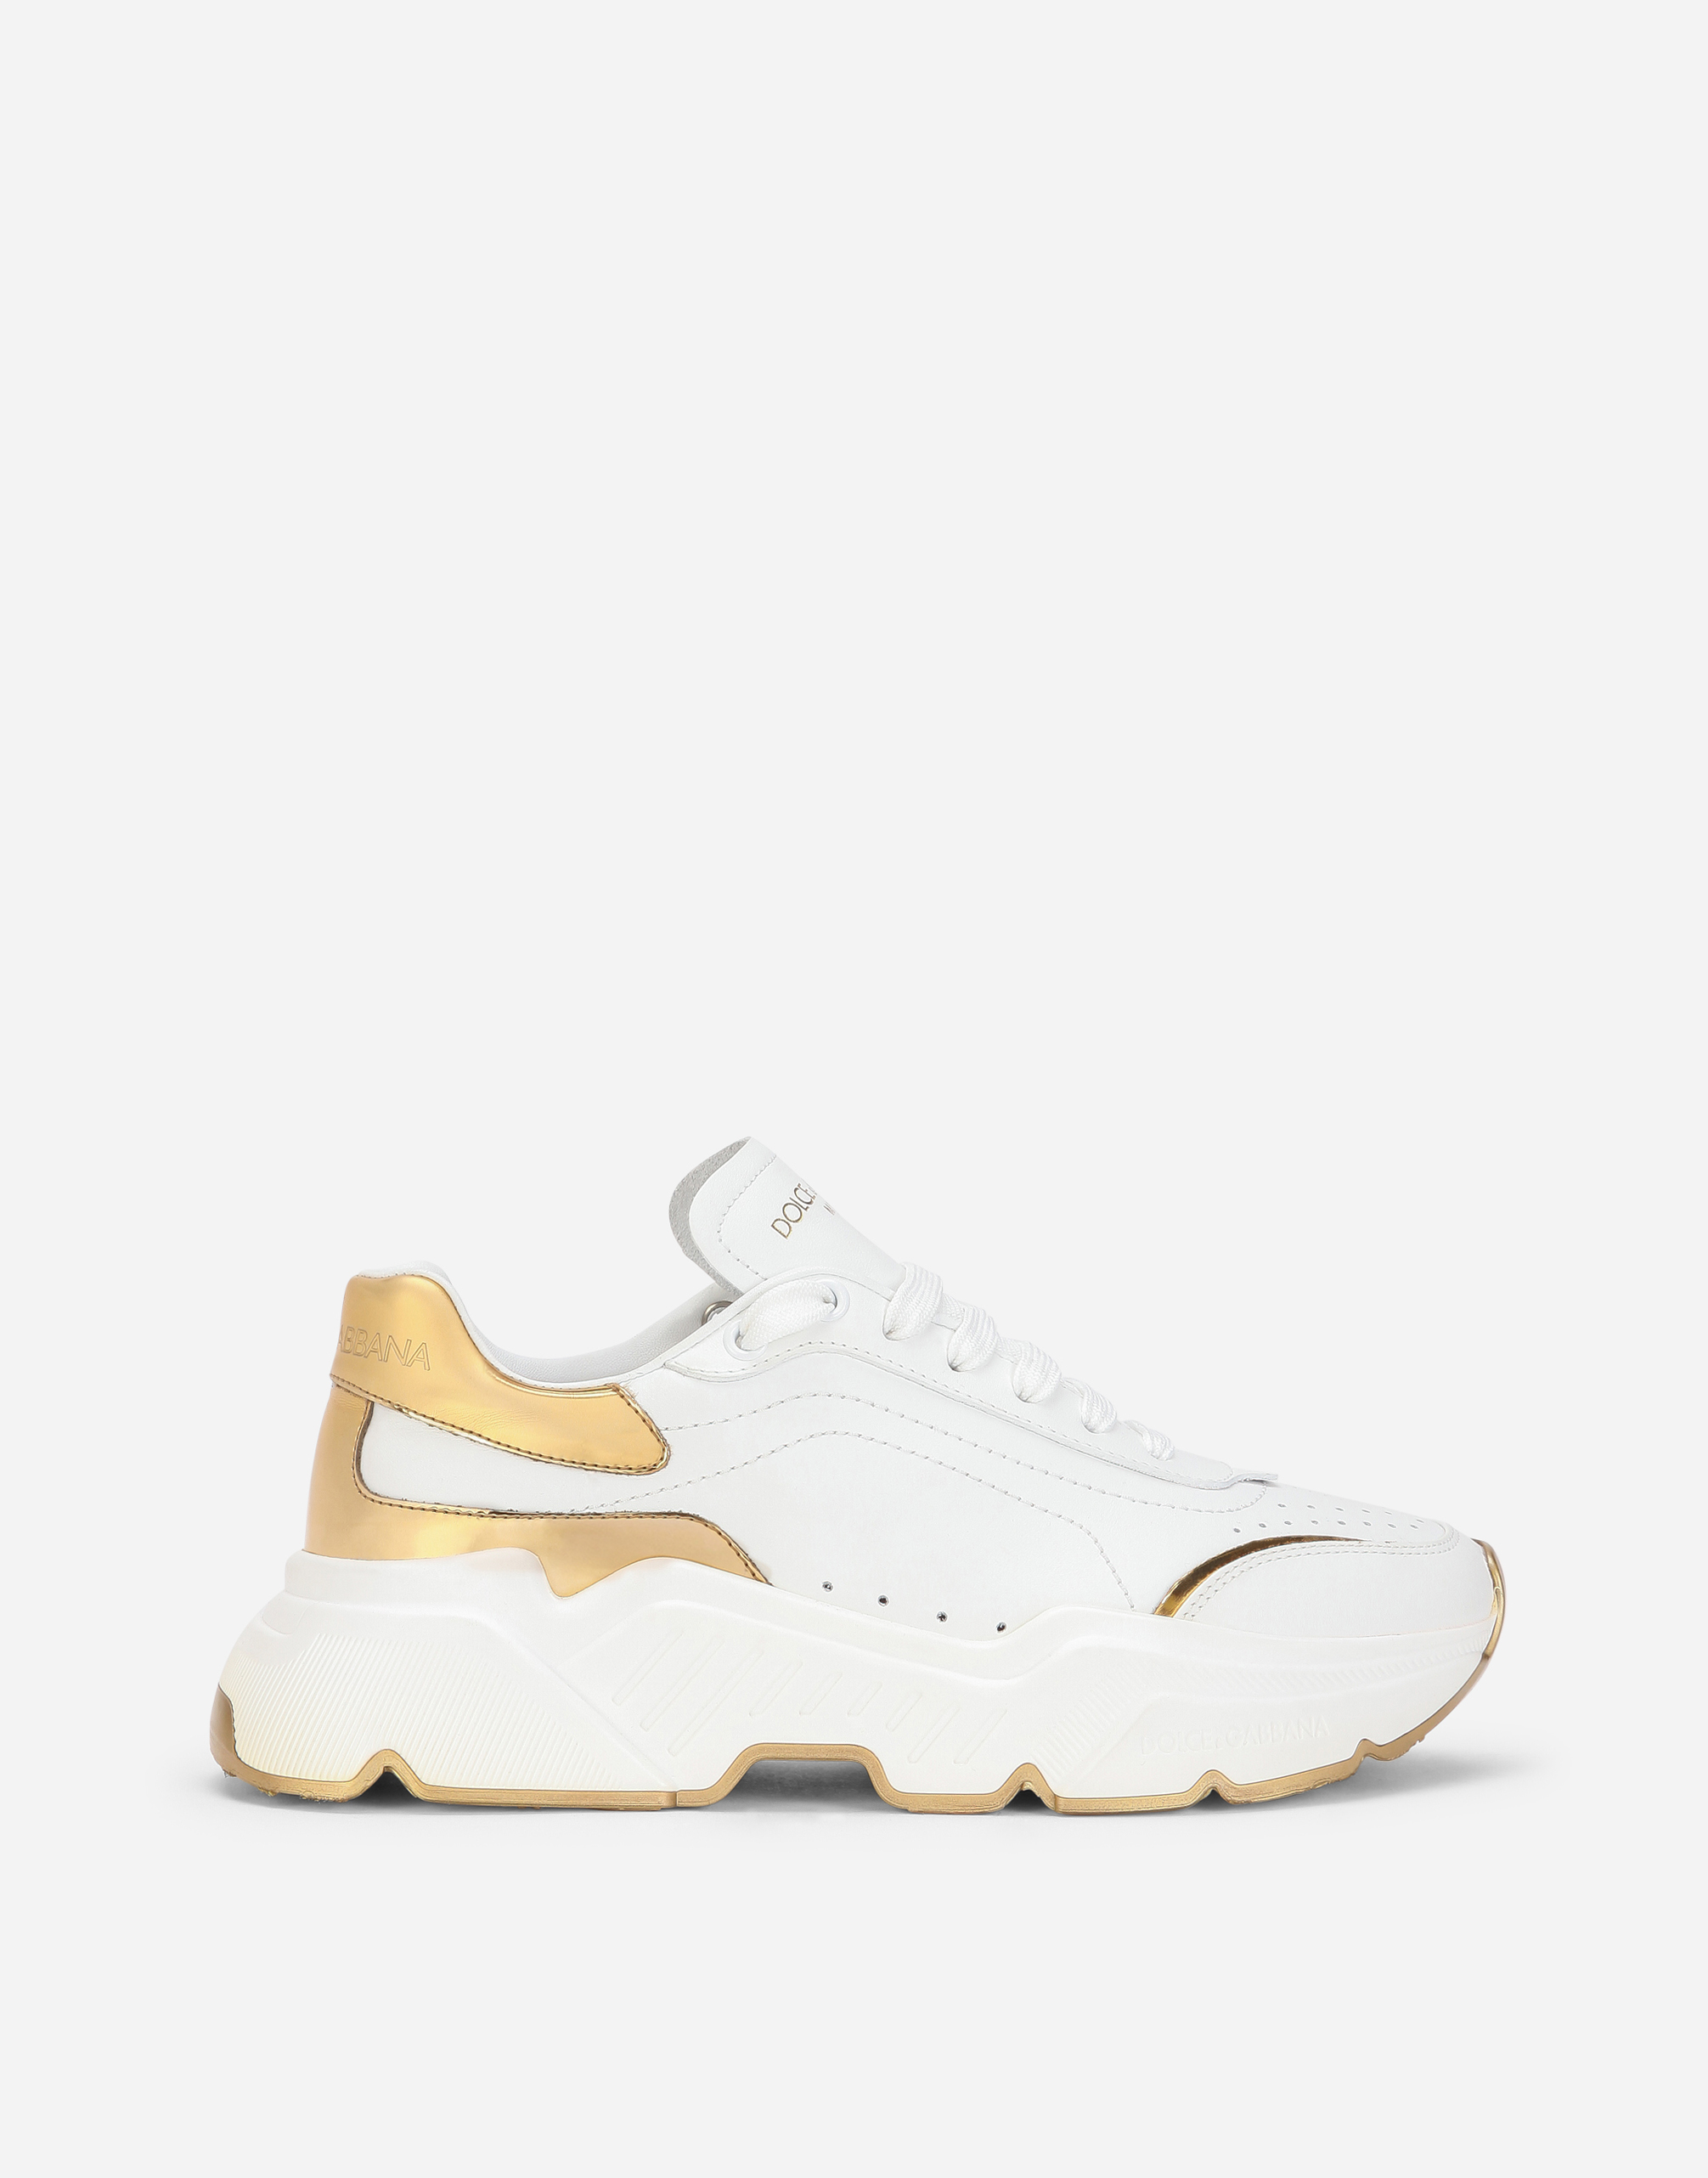 Nappa leather Daymaster sneakers in White/Gold